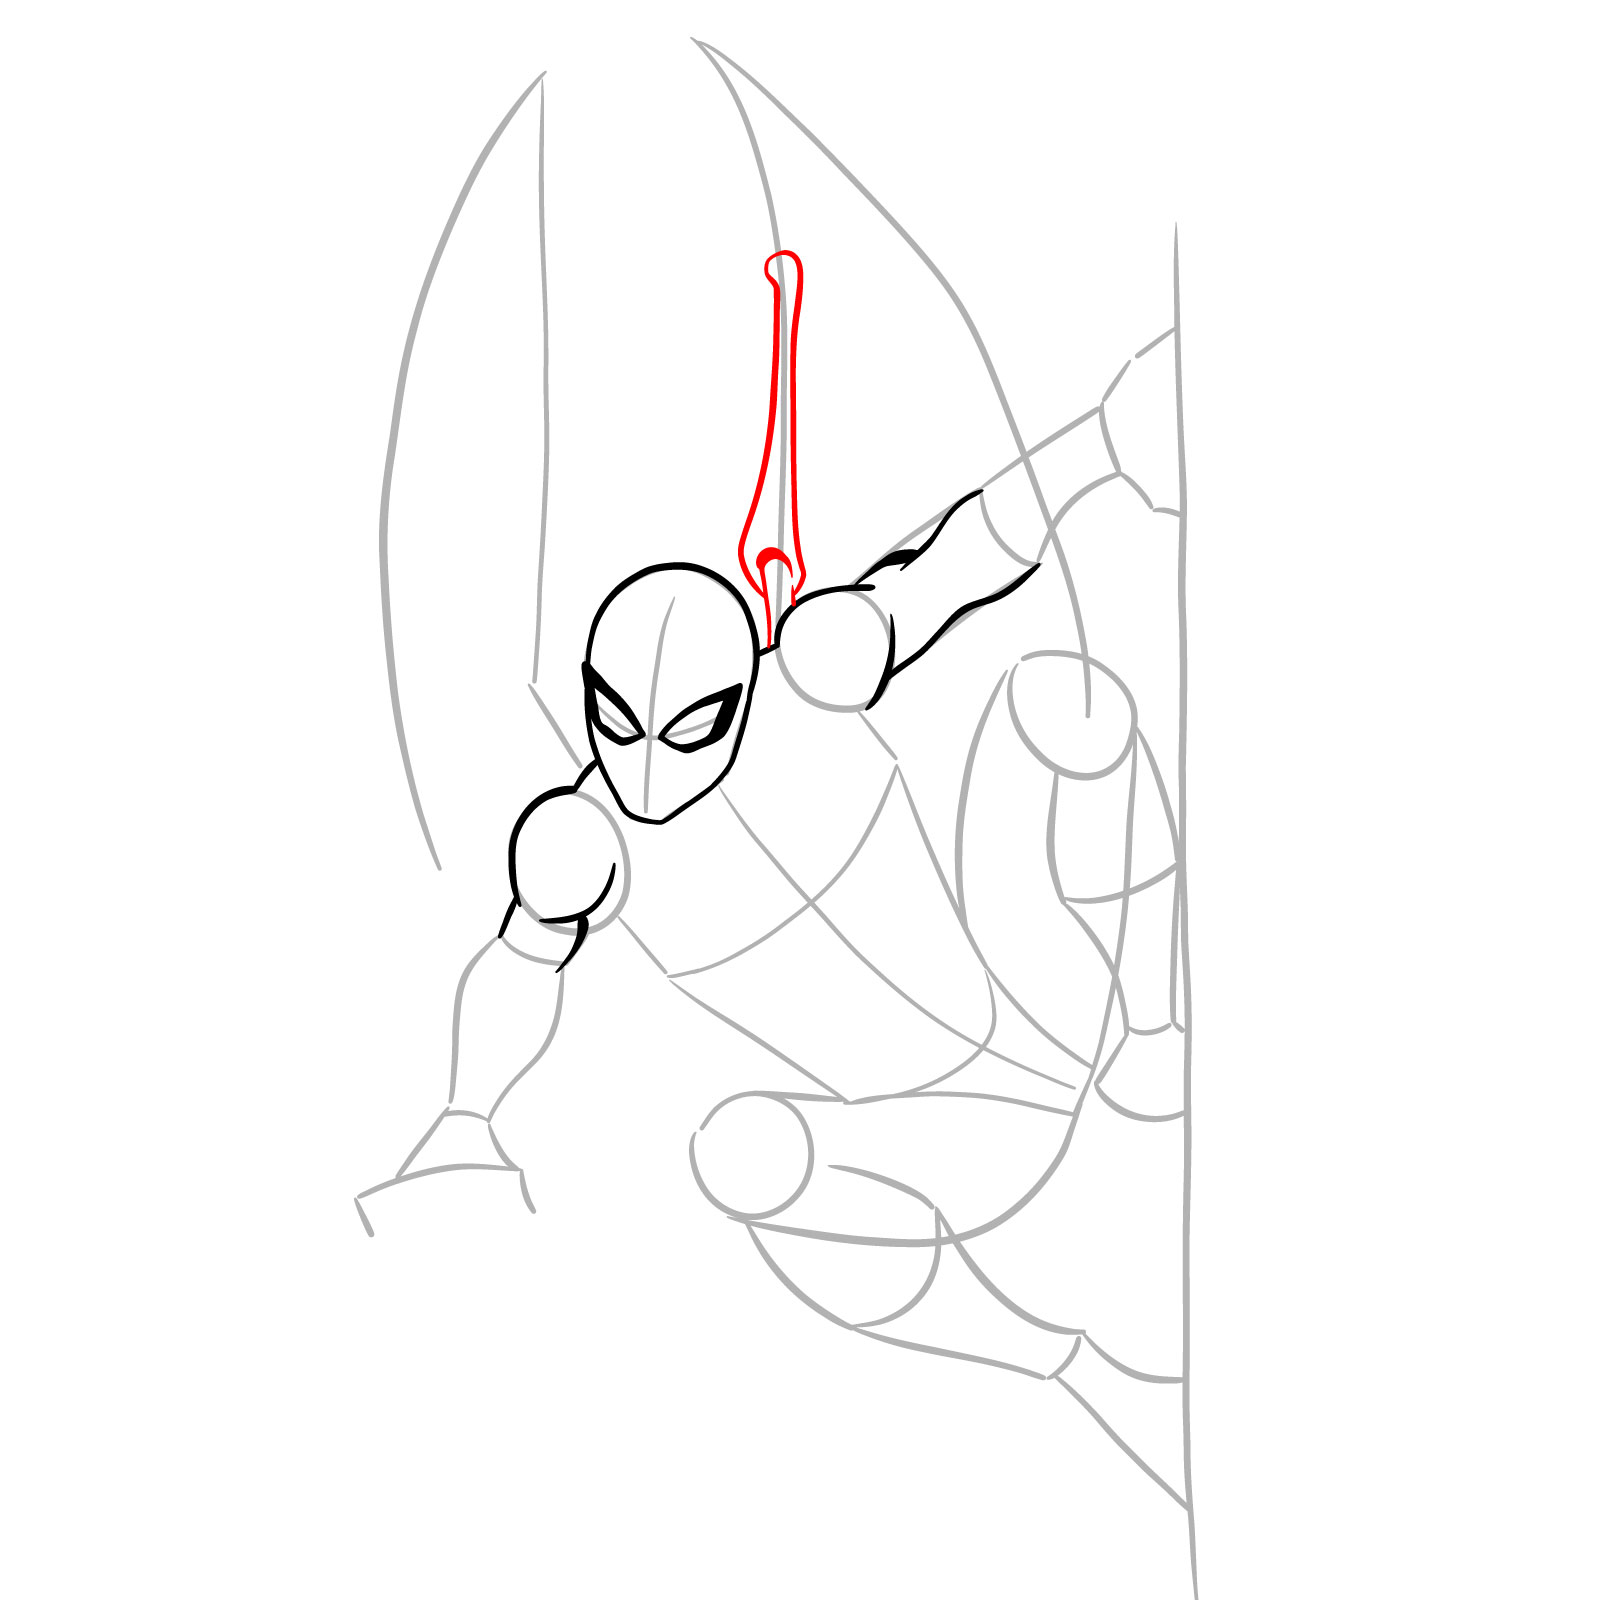 How to draw The Superior Spider-Man - step 10